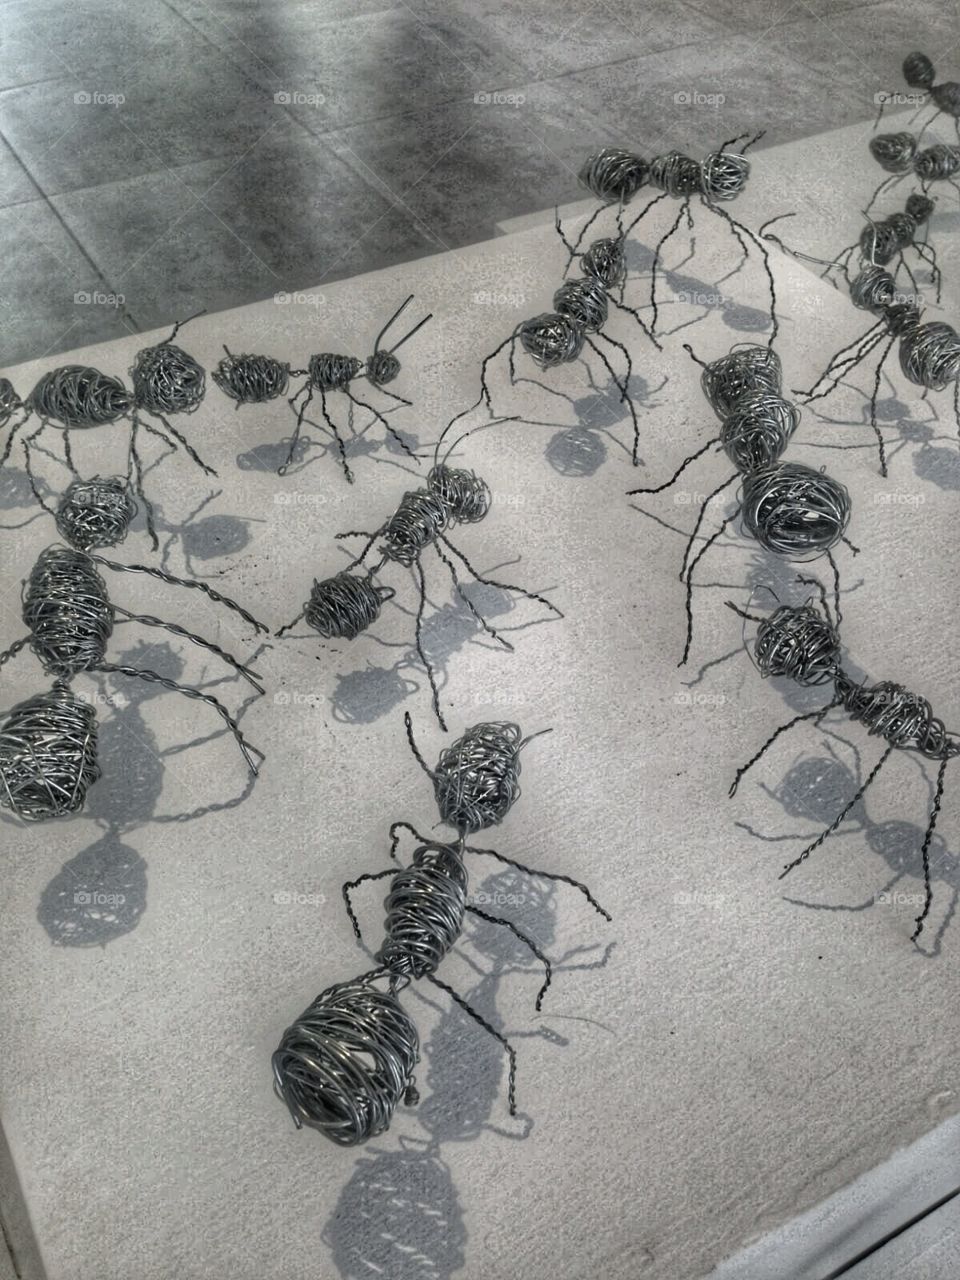 Ants and arts